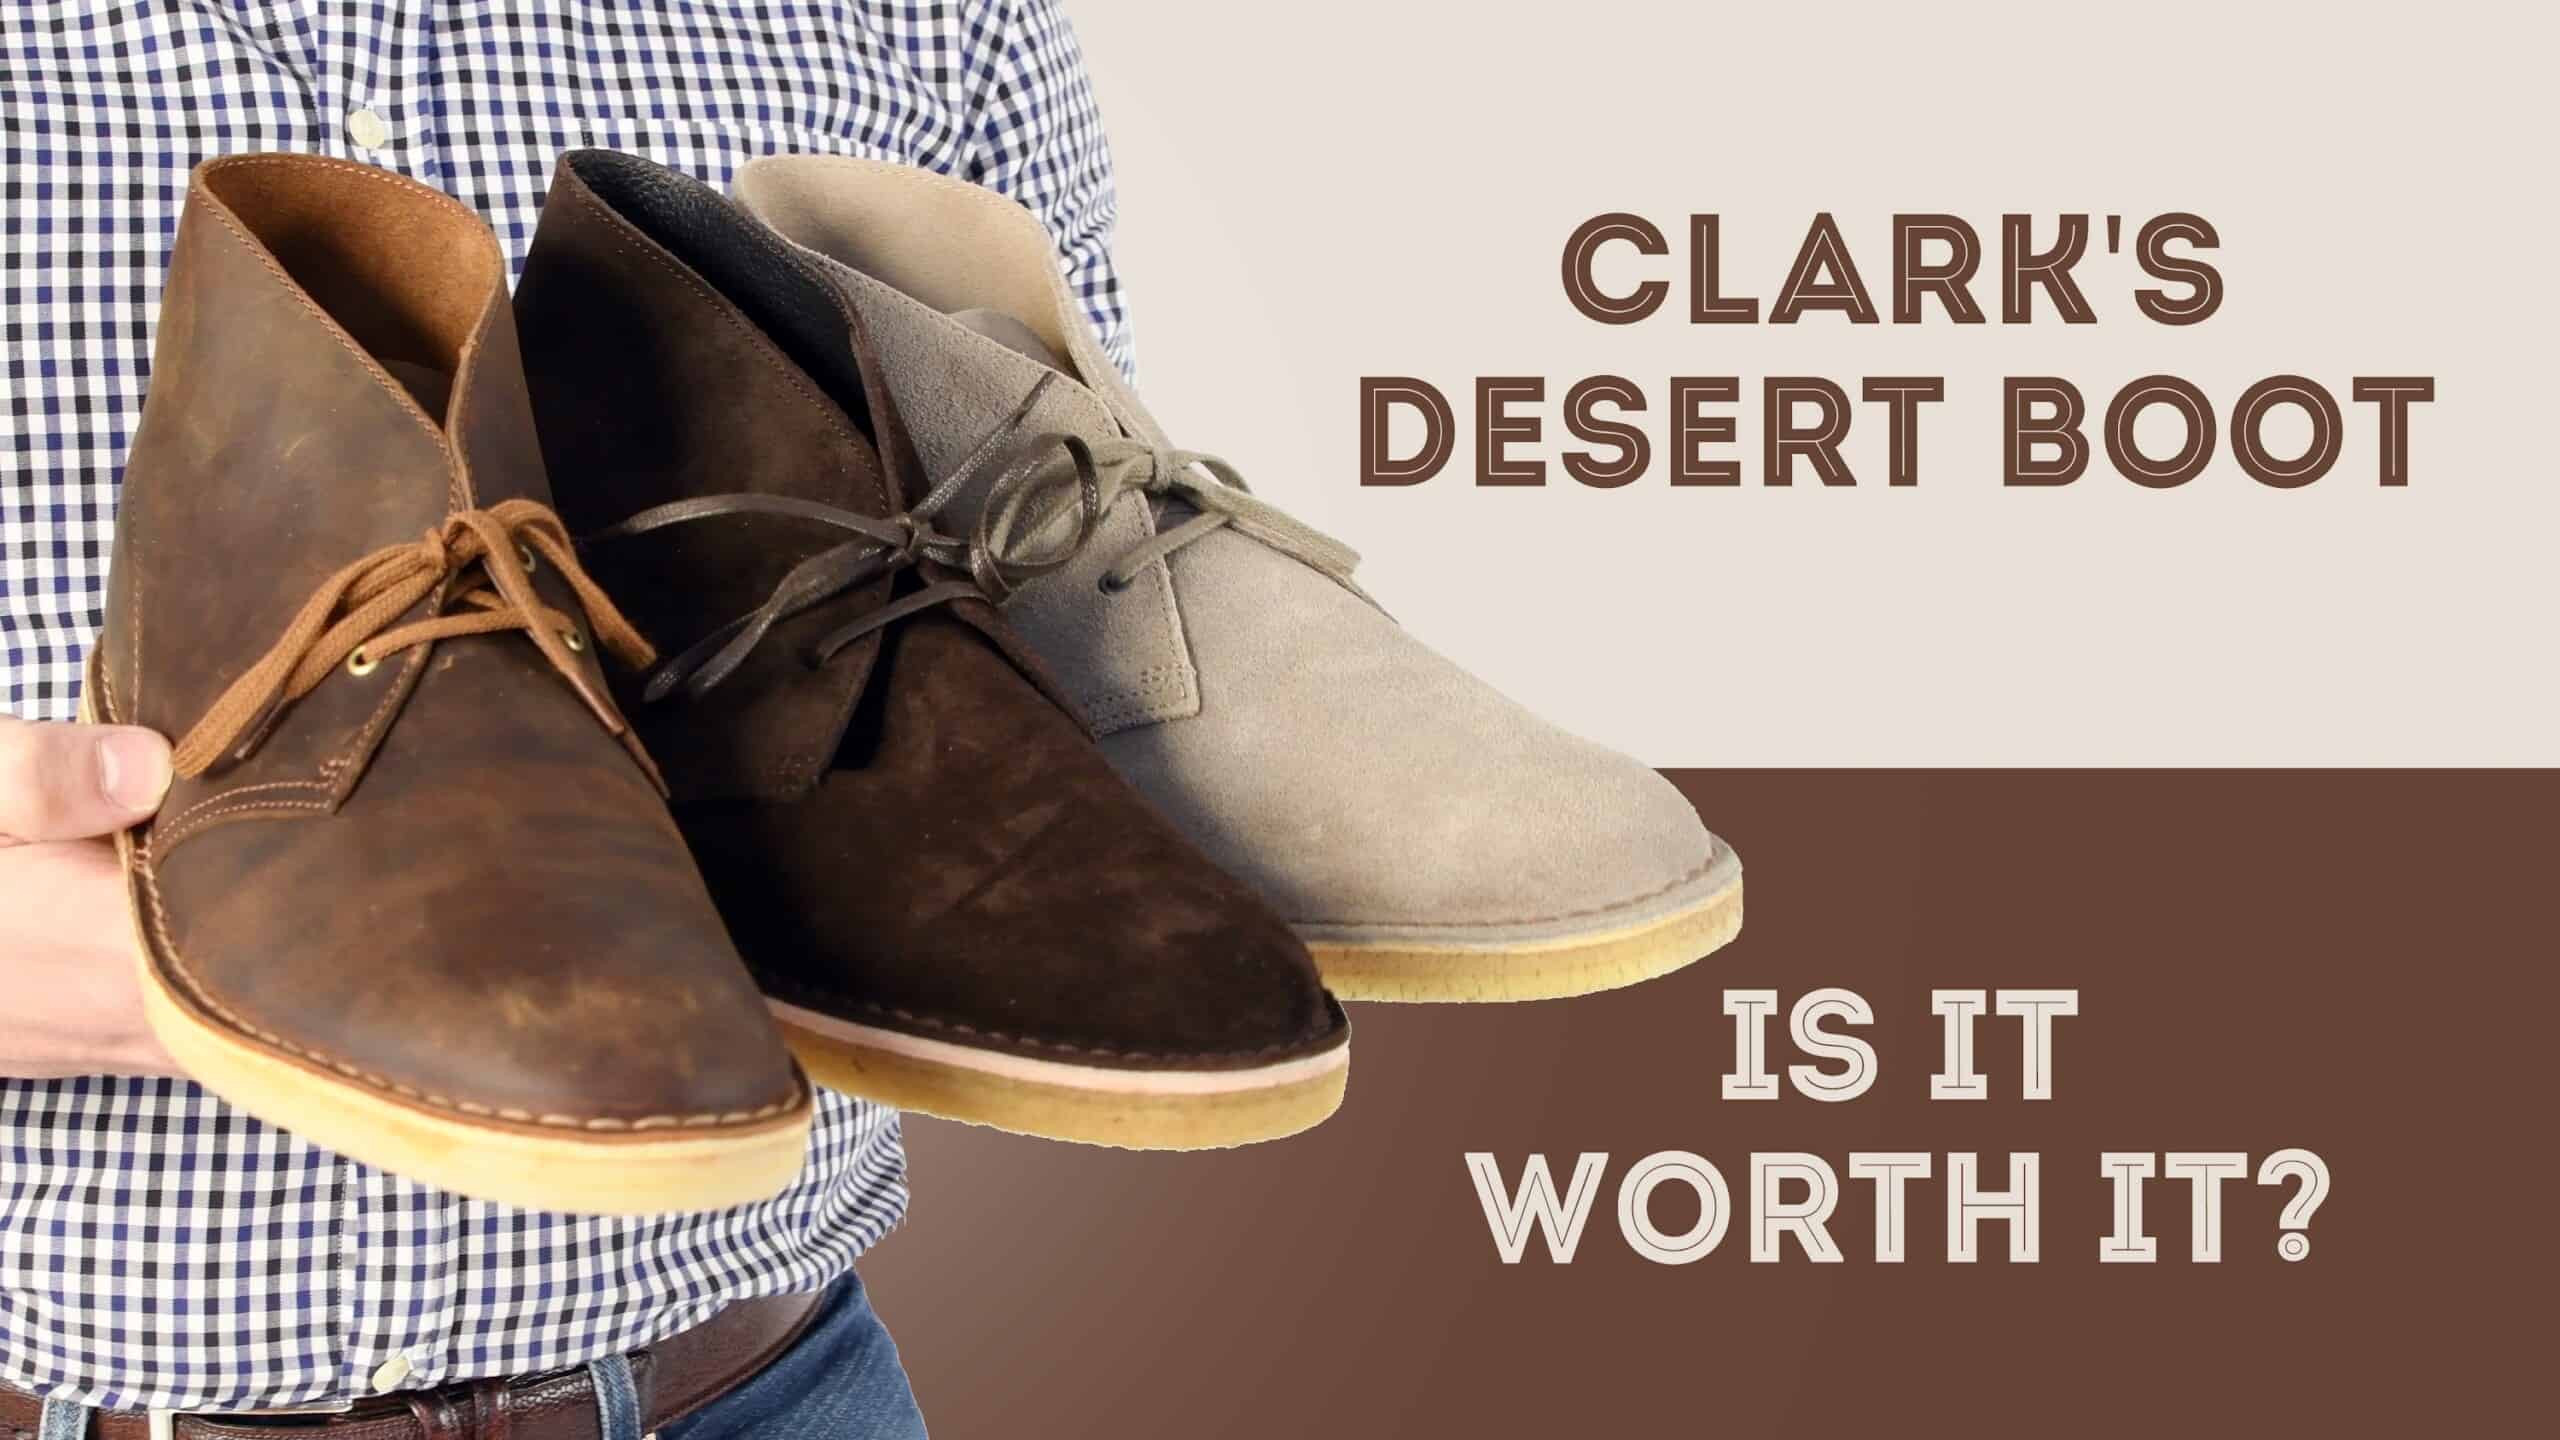 Tractor champion To interact Is It Worth It: Iconic Clarks Desert Boot